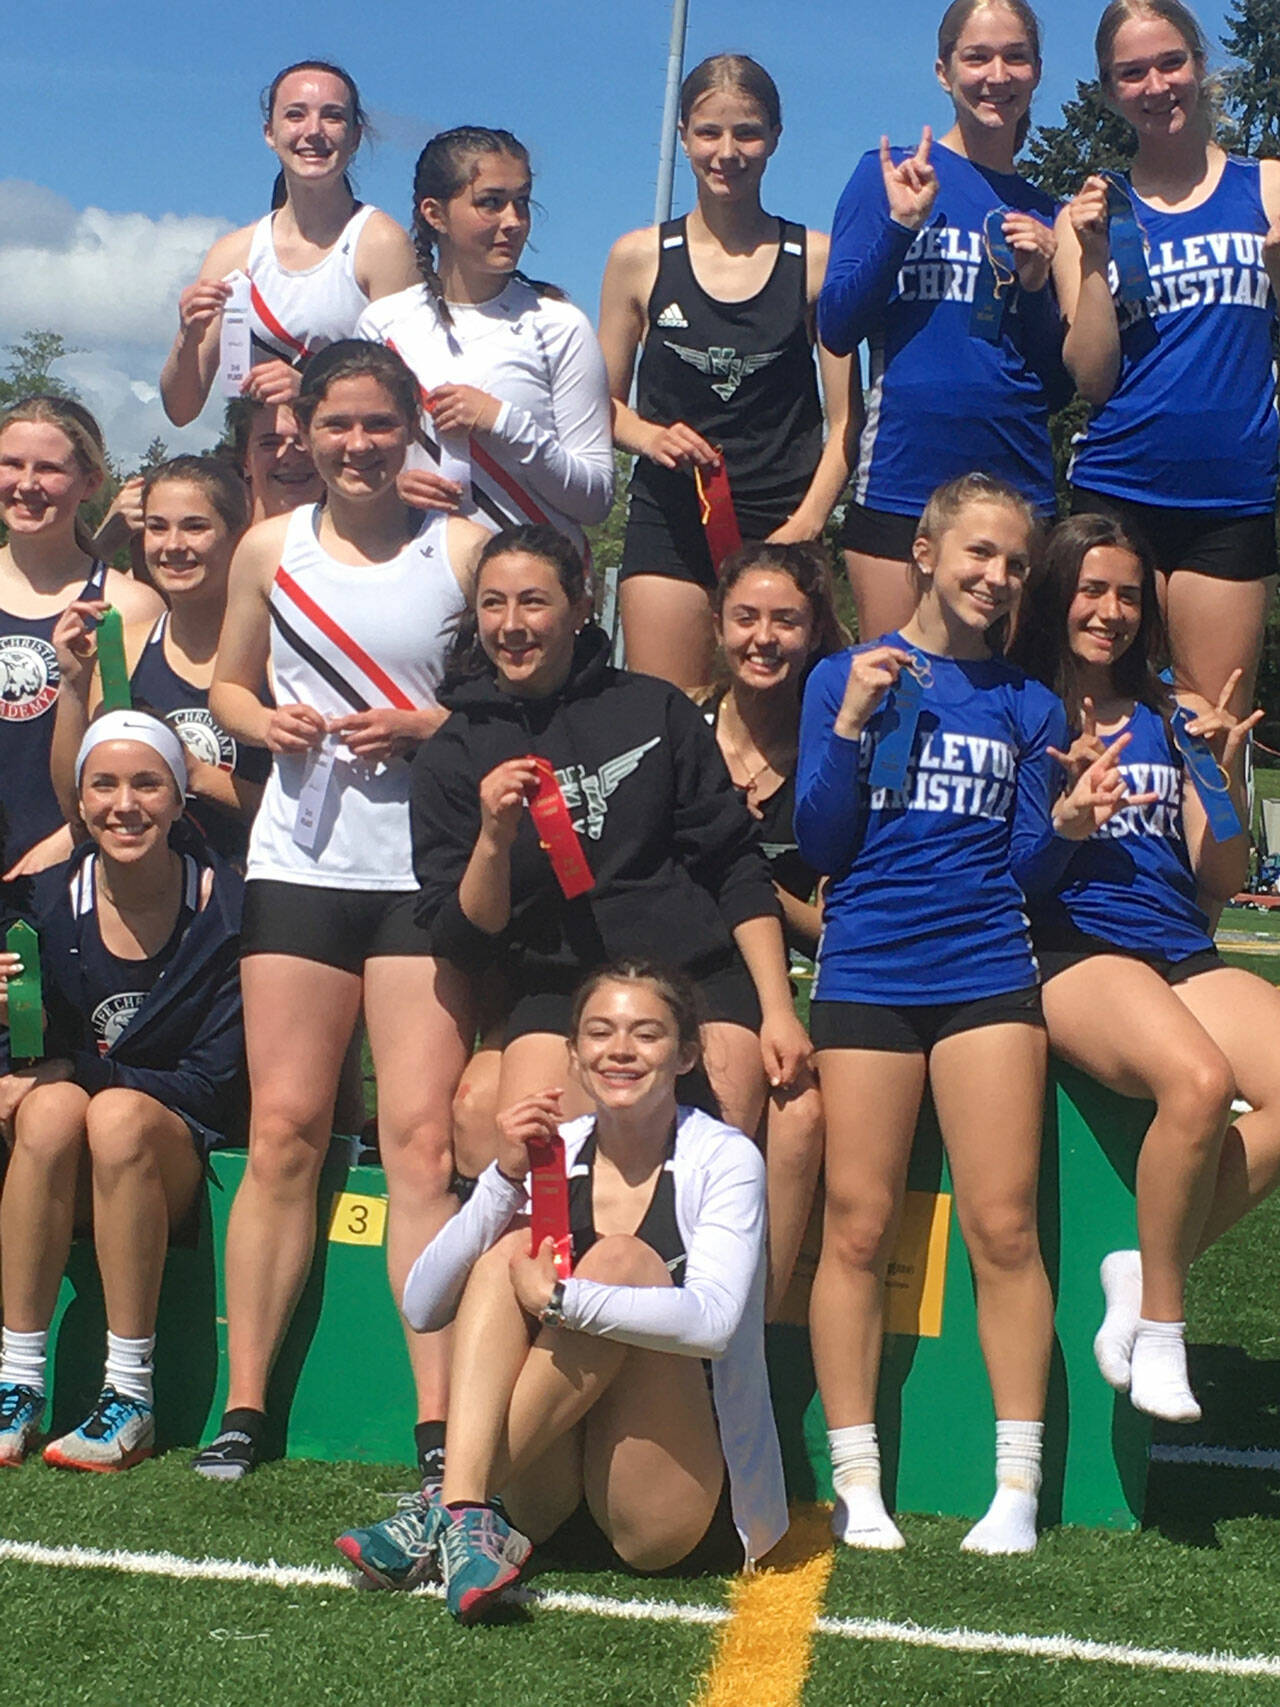 (Kevin Ross Photo) VHS Girls 4x1 relay team, on the awards podium after finishing in second place with a time of 54.70. Pictured in the black singlets, Annabel Moeckel (top) Amelia Medeiros (middle left) Nicki Becker (middle right) Alana Bass on the bottom. Not pictured is team captain Phoebe Wilke who was injured earlier in the week and could not participate in the relay.